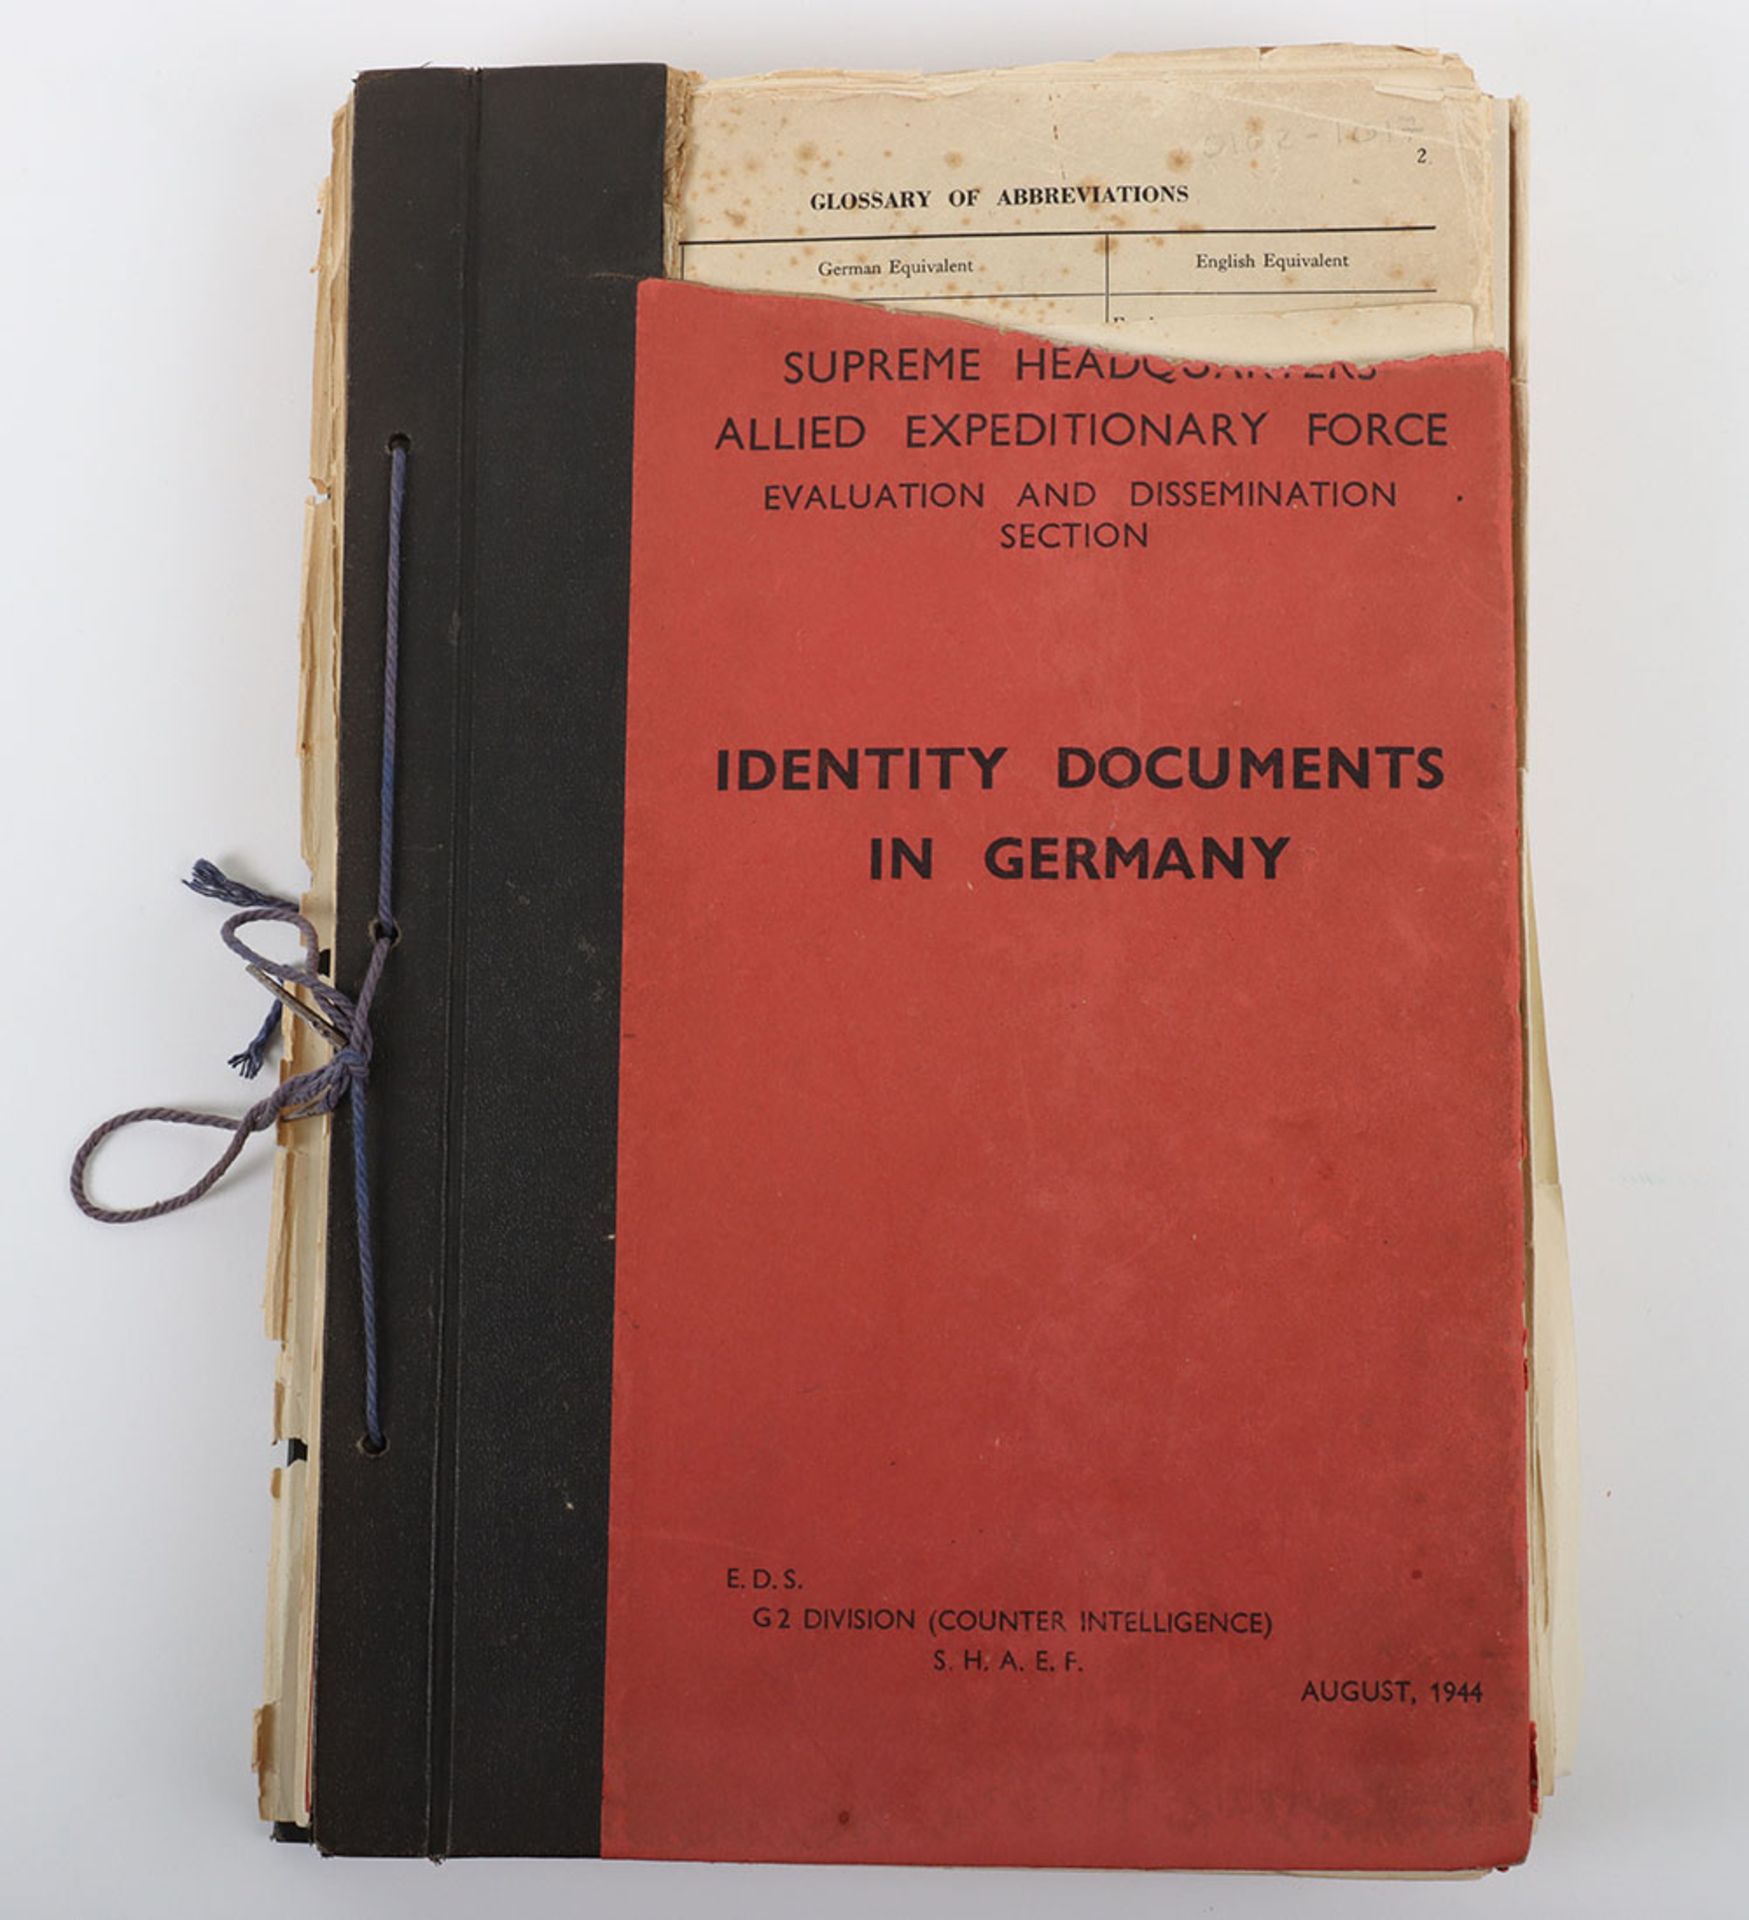 Identity Documents in Germany (Supreme Headquarters Allied Expeditionary Force, Evaluation and Disse